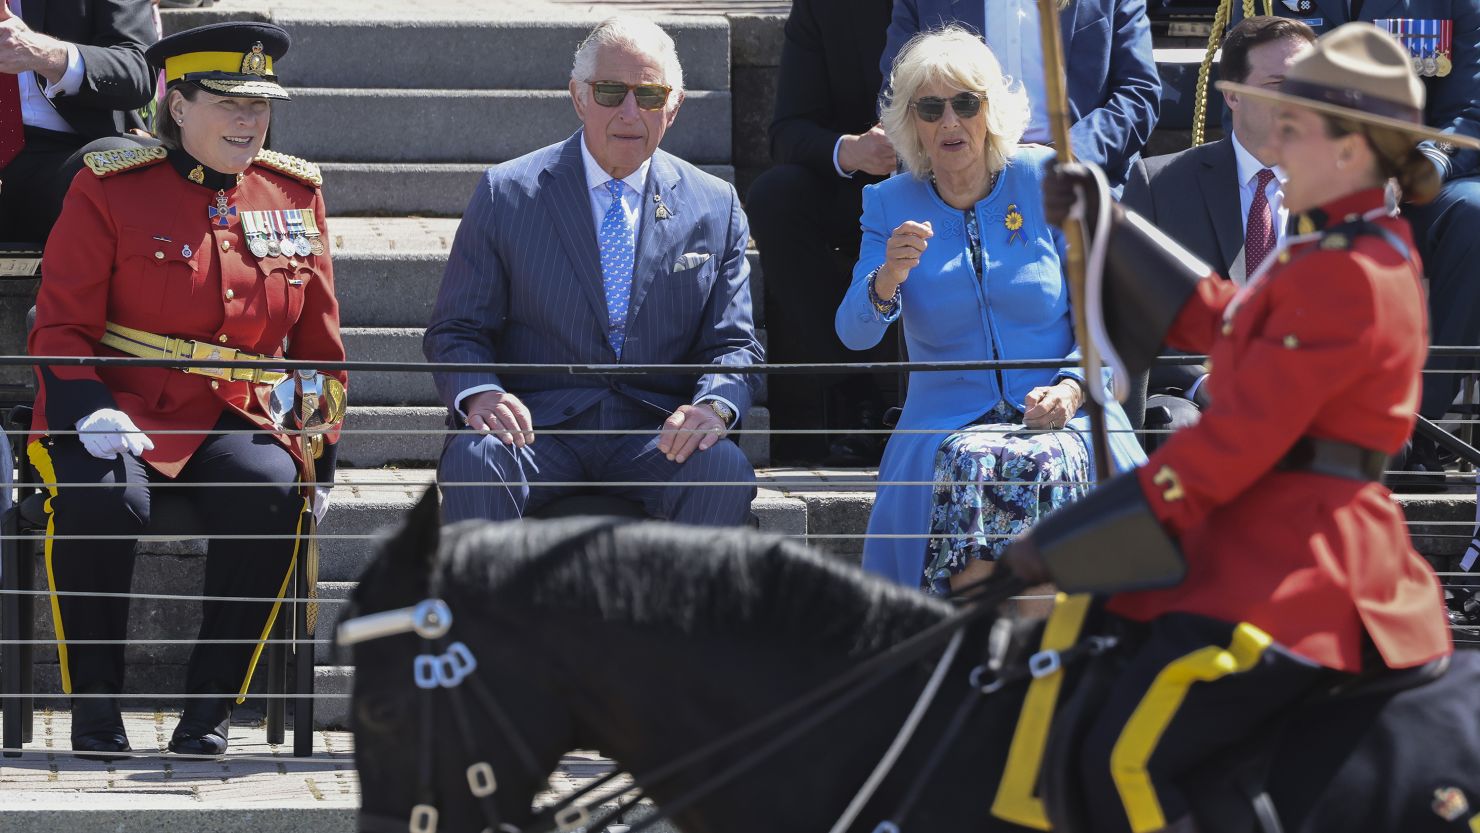 Prince Charles and Camilla, Duchess of Cornwall watch a parade by the Royal Canadian Mounted Police.